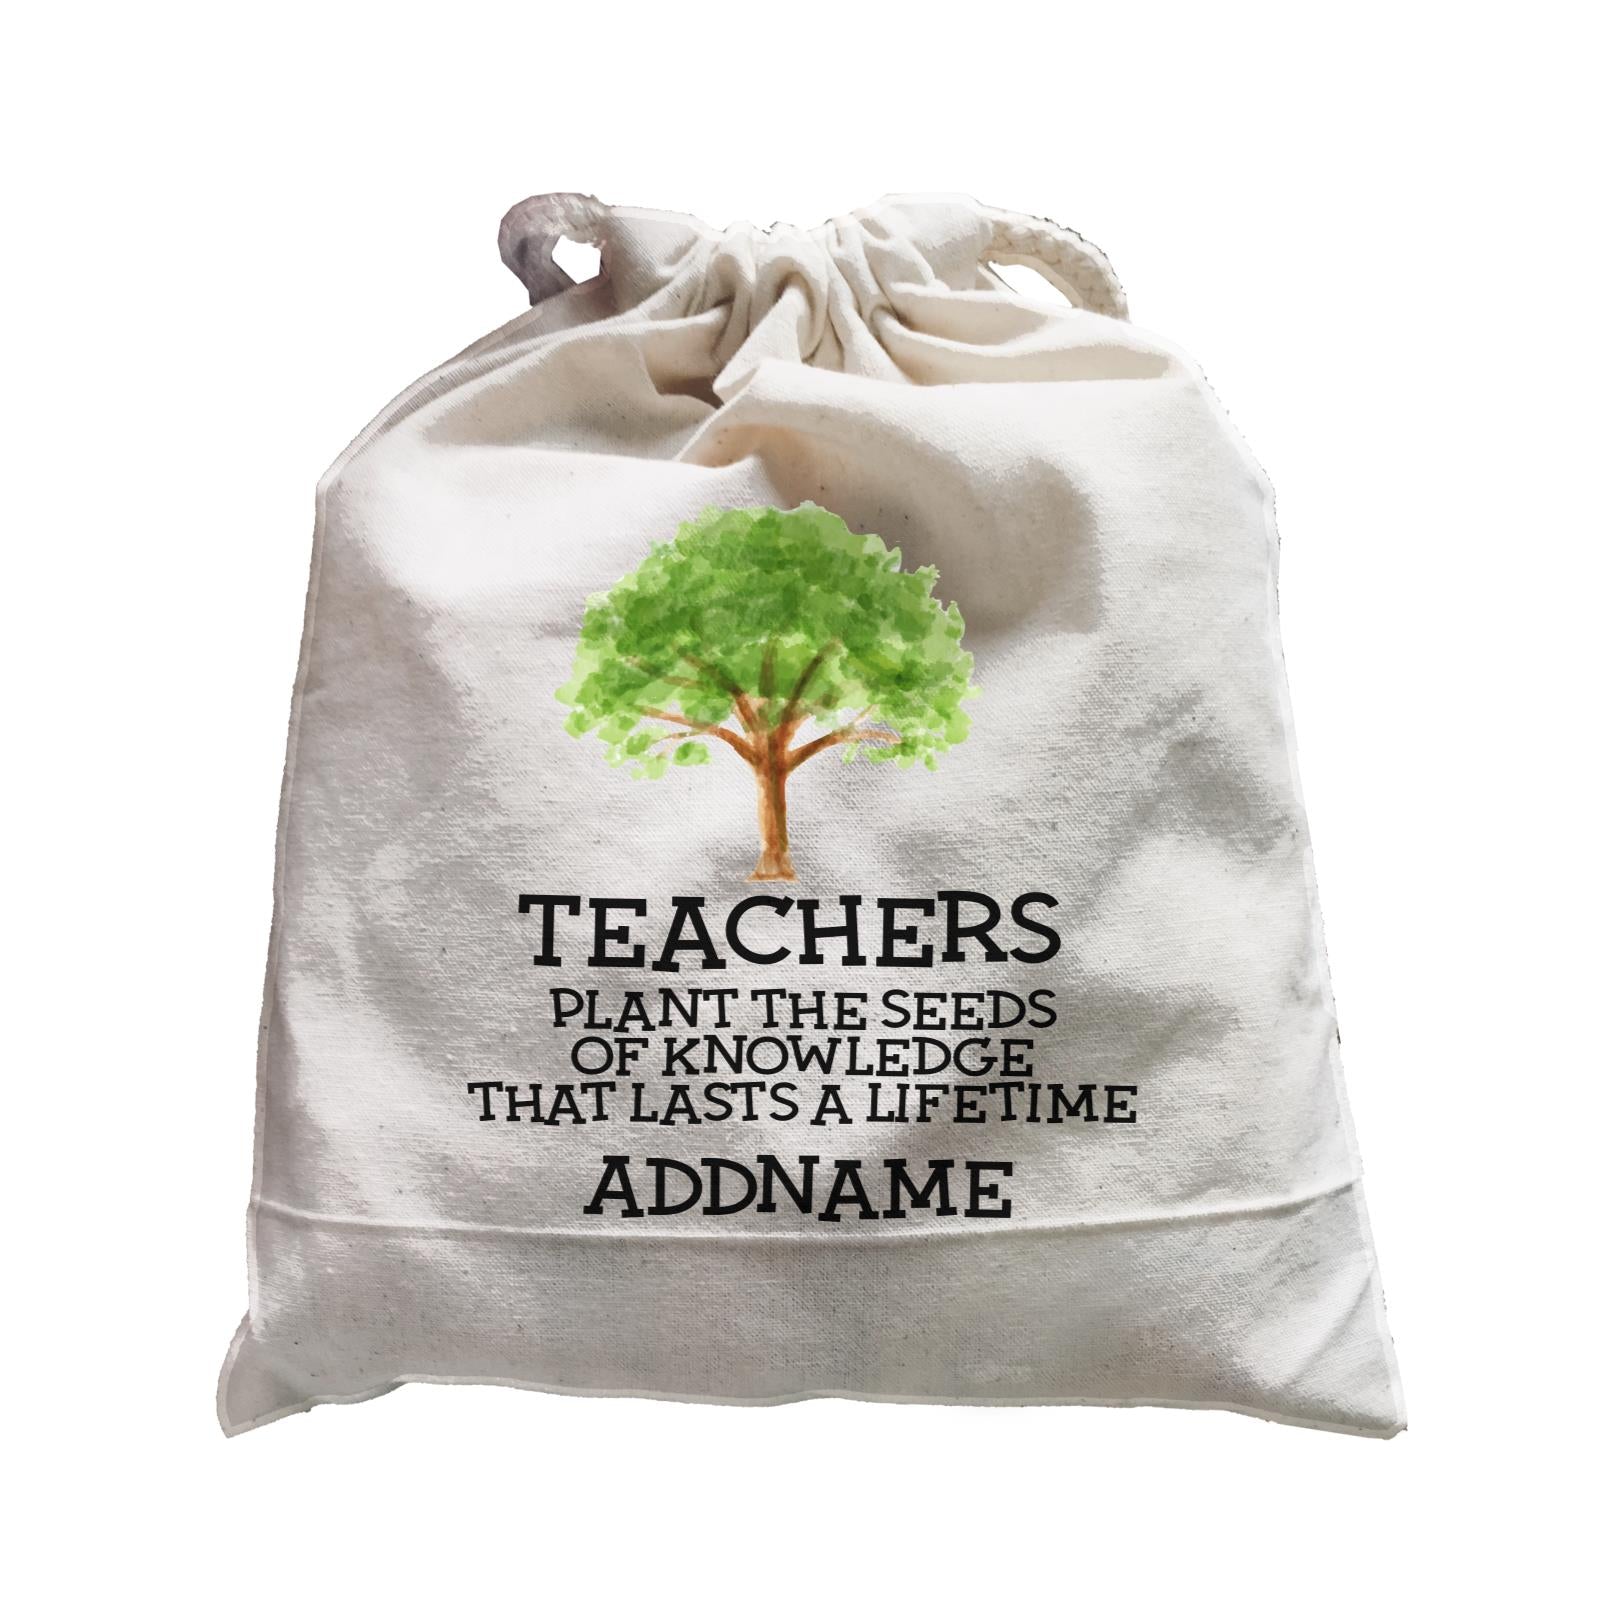 Teacher Quotes 2 Teachers Plant The Seeds Of Knowledge That Lasts A Lifetime Addname Satchel